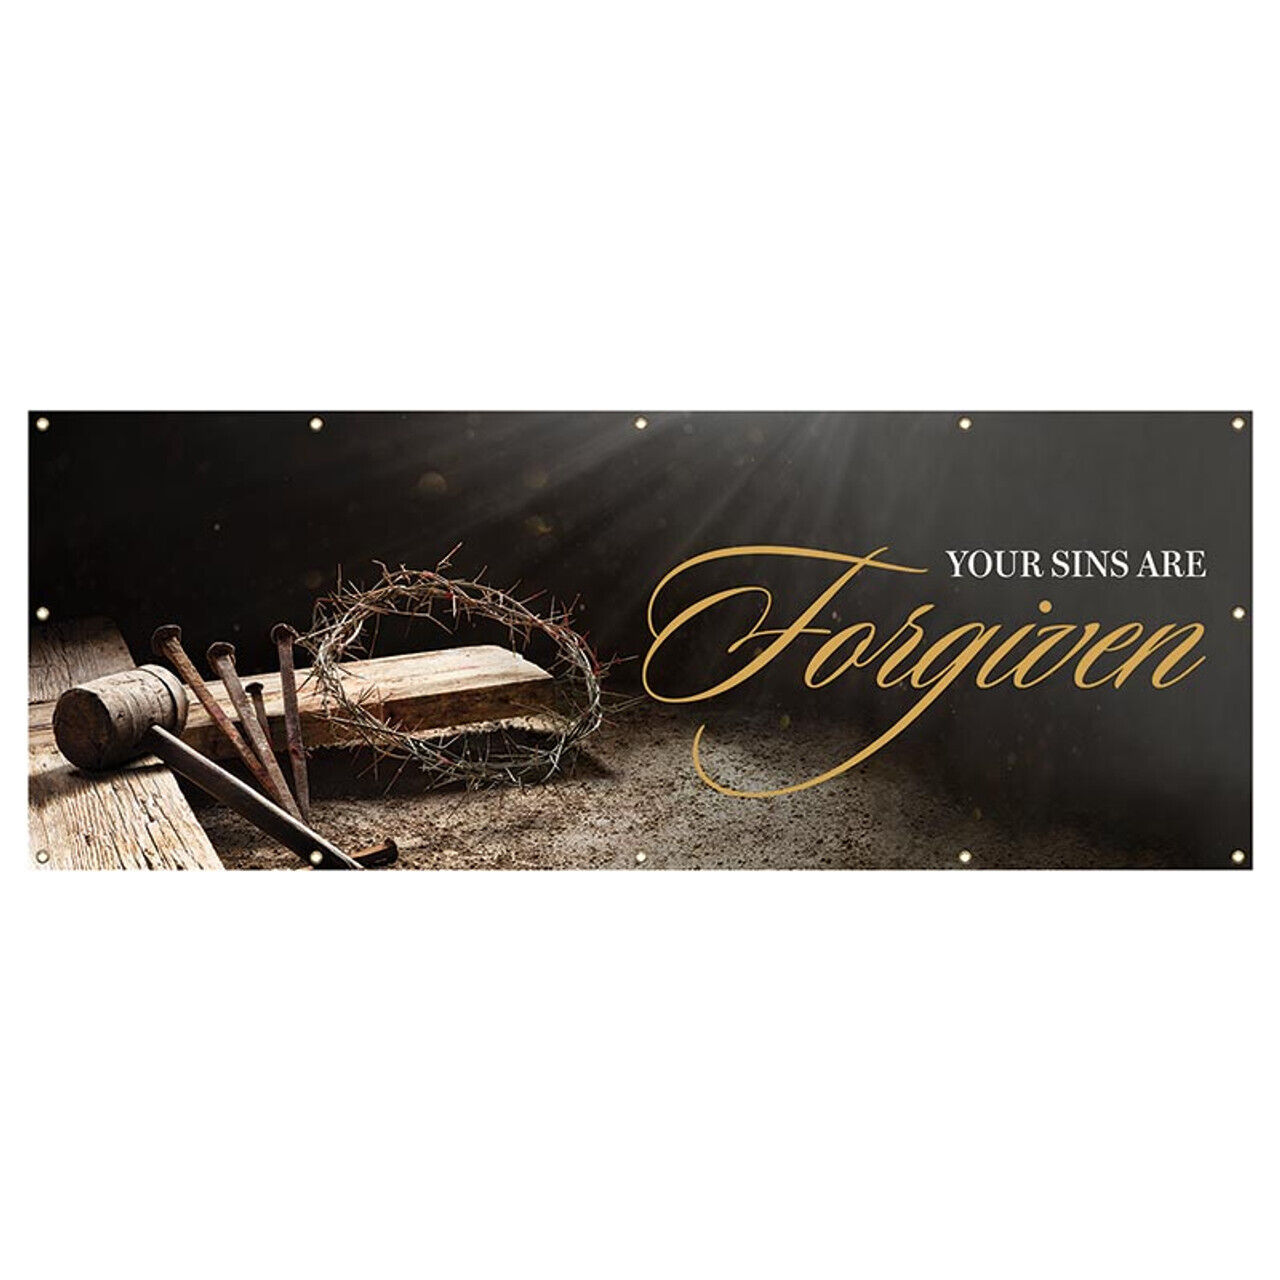 Inspirational Christian Church Outdoor Banners 8ft x 3ft Your Sins Are Forgiven